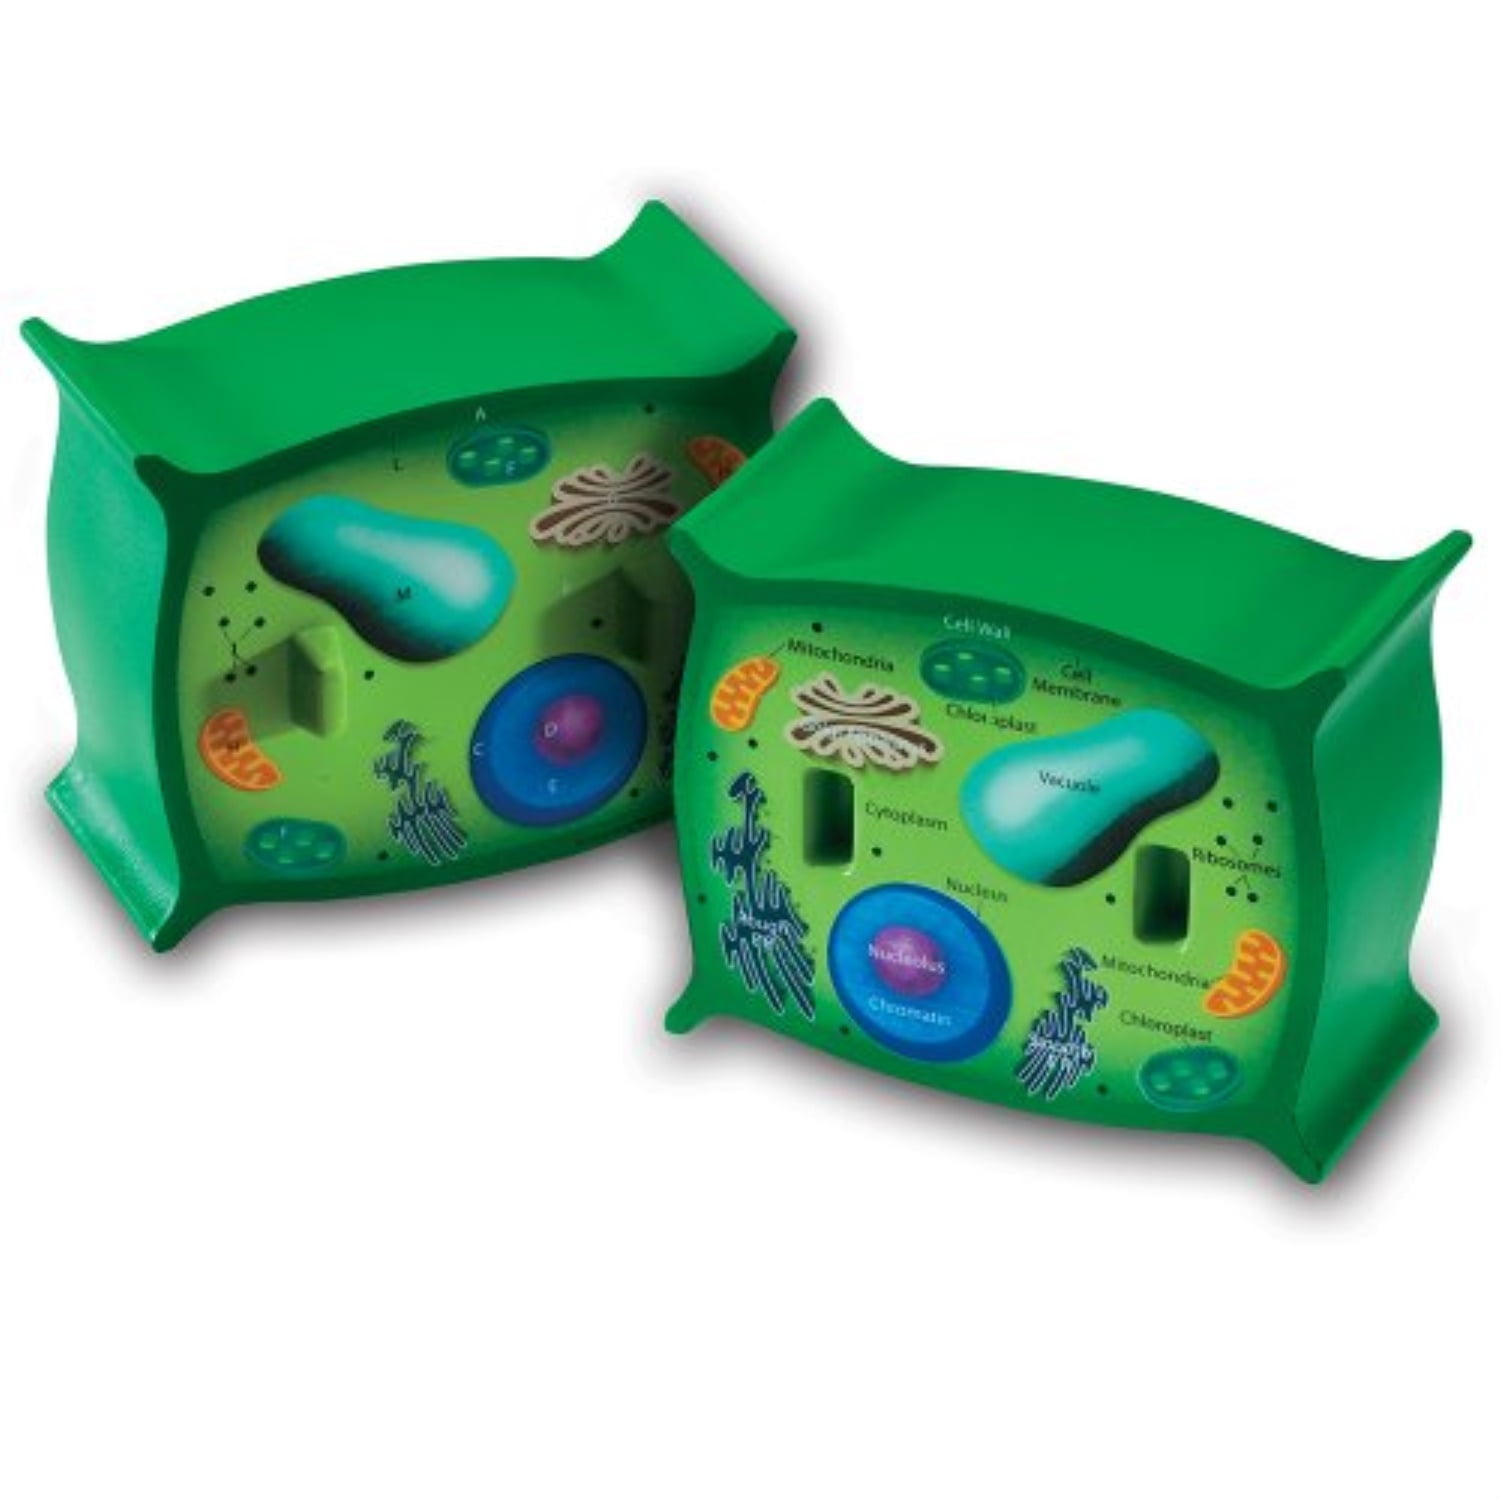 Famemaster 4D Science Plant Cell Anatomy Model Science Learning Set 26701 New 